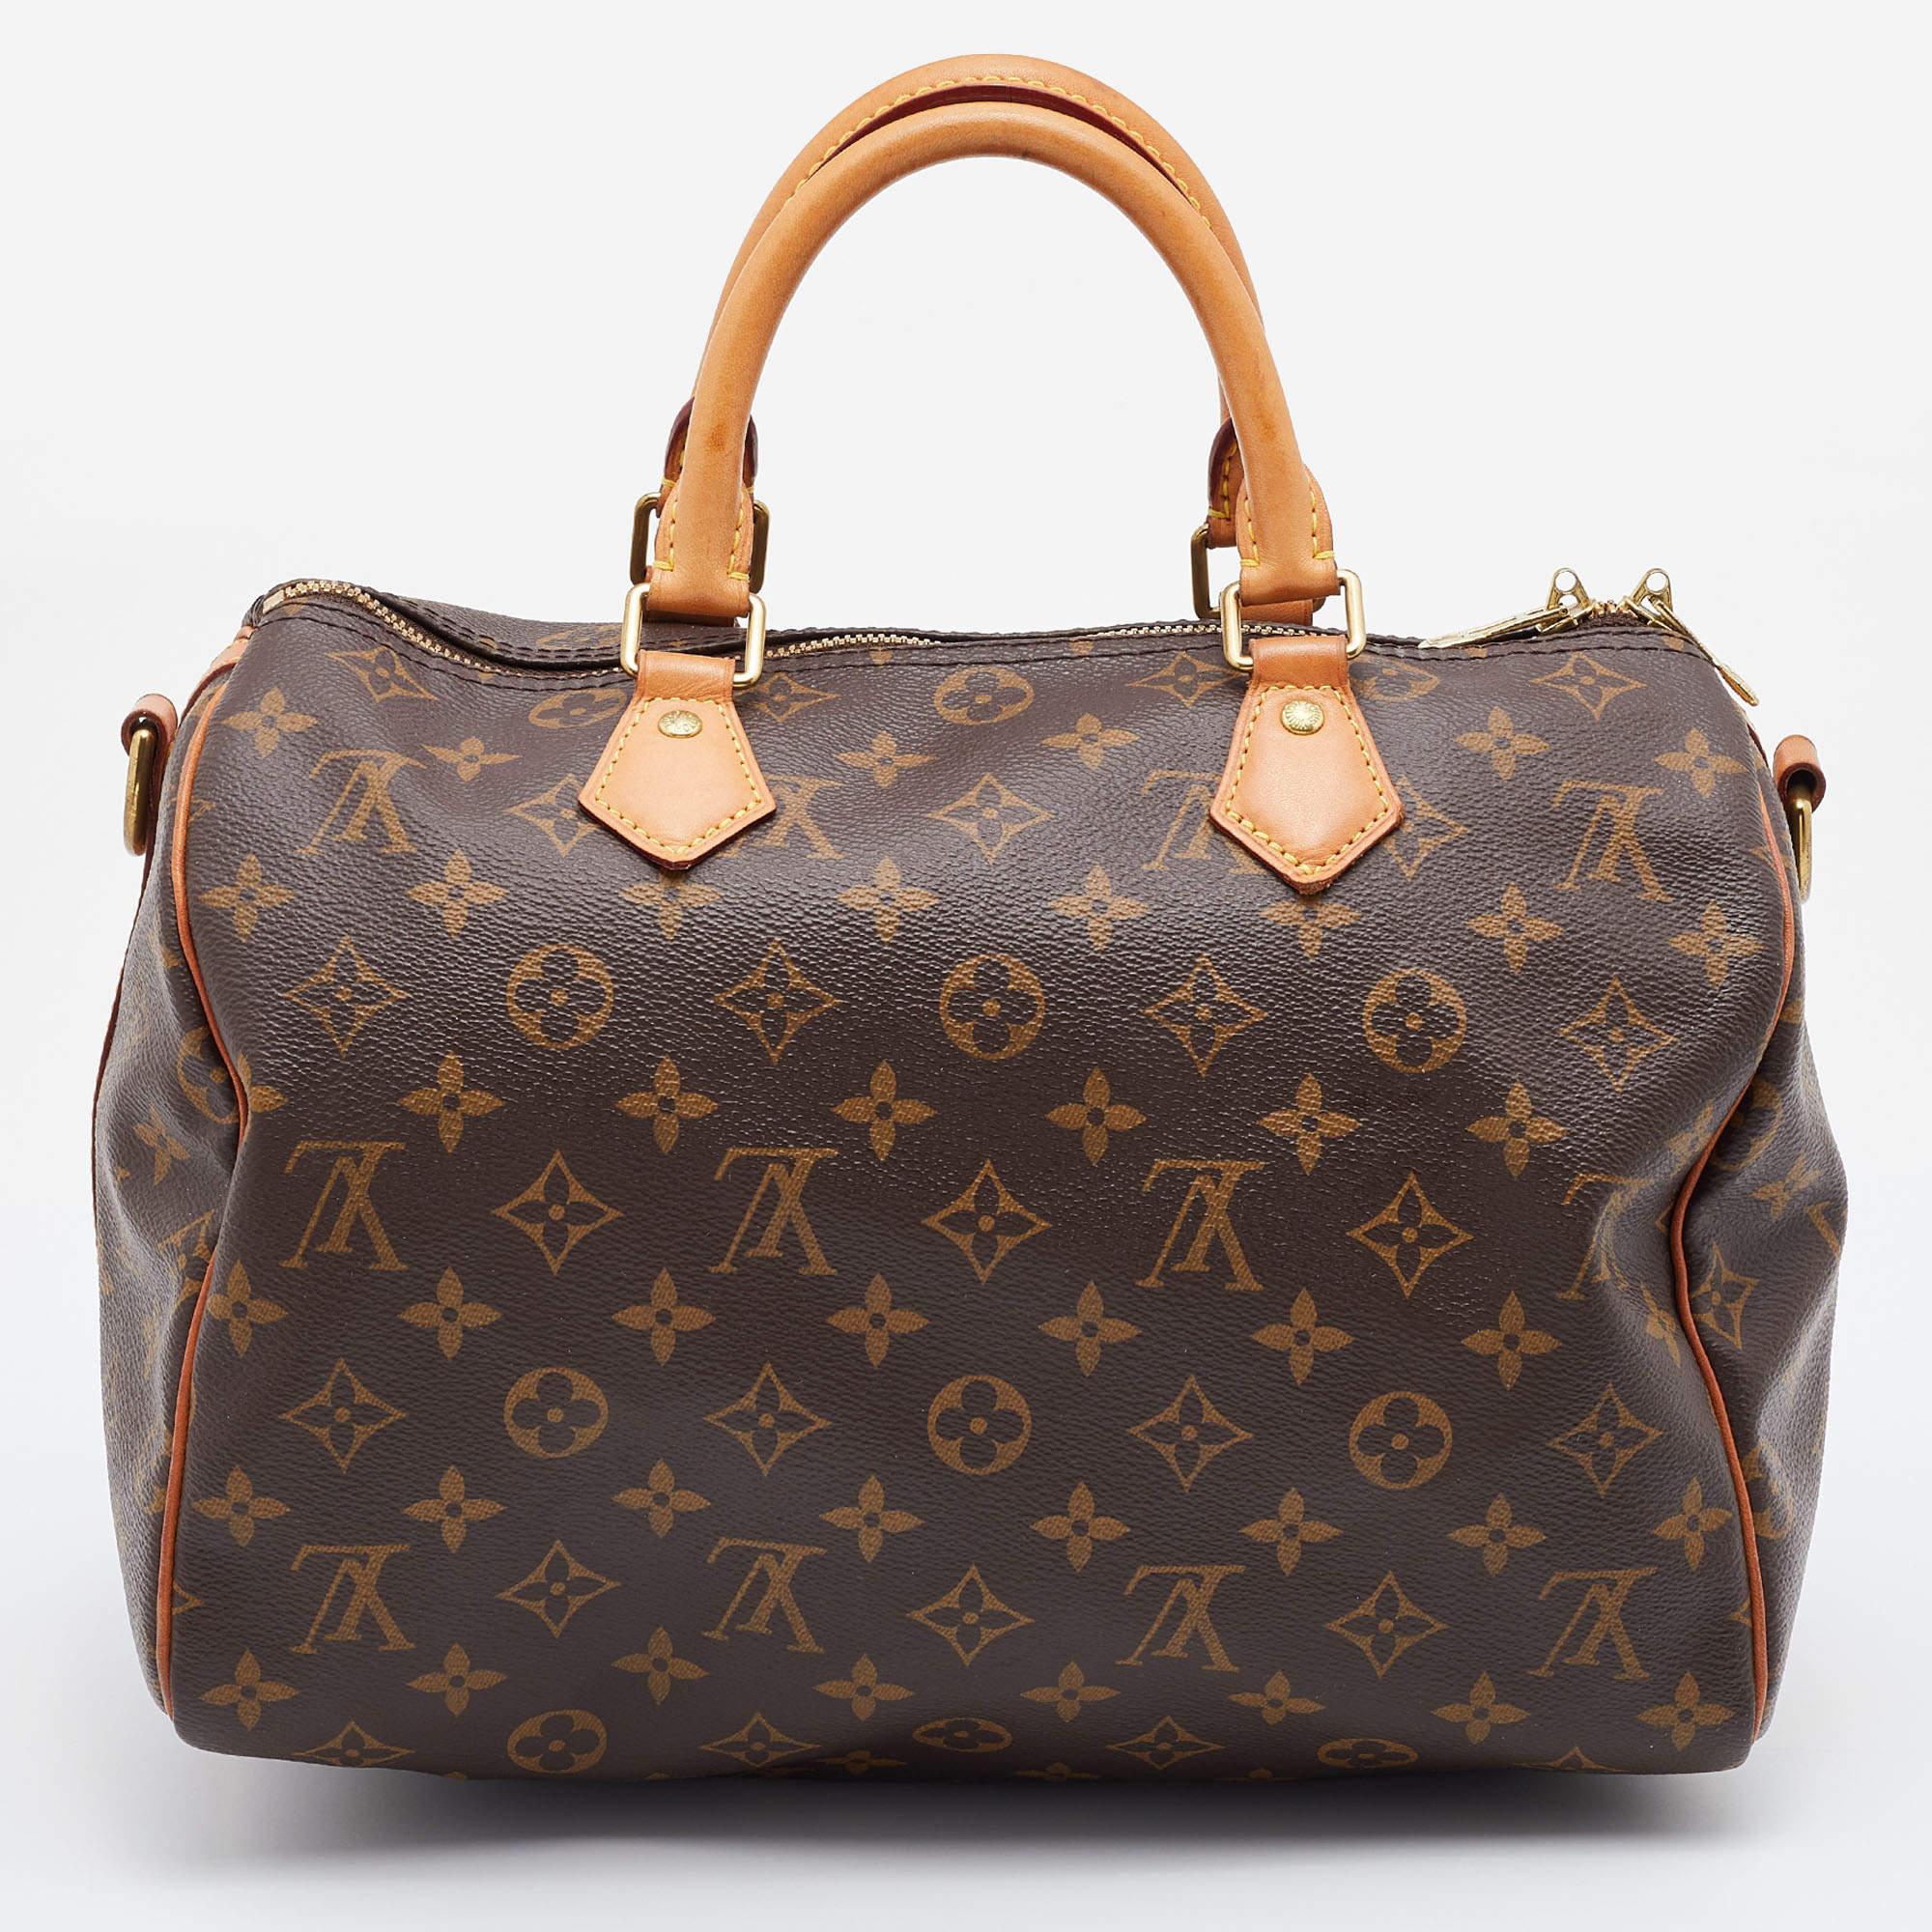 Titled one of the greatest handbags in the history of luxury fashion, the Speedy from Louis Vuitton was first created for everyday use. This Speedy 30 comes crafted from coated canvas and leather with two handles and a top zipper leading to a